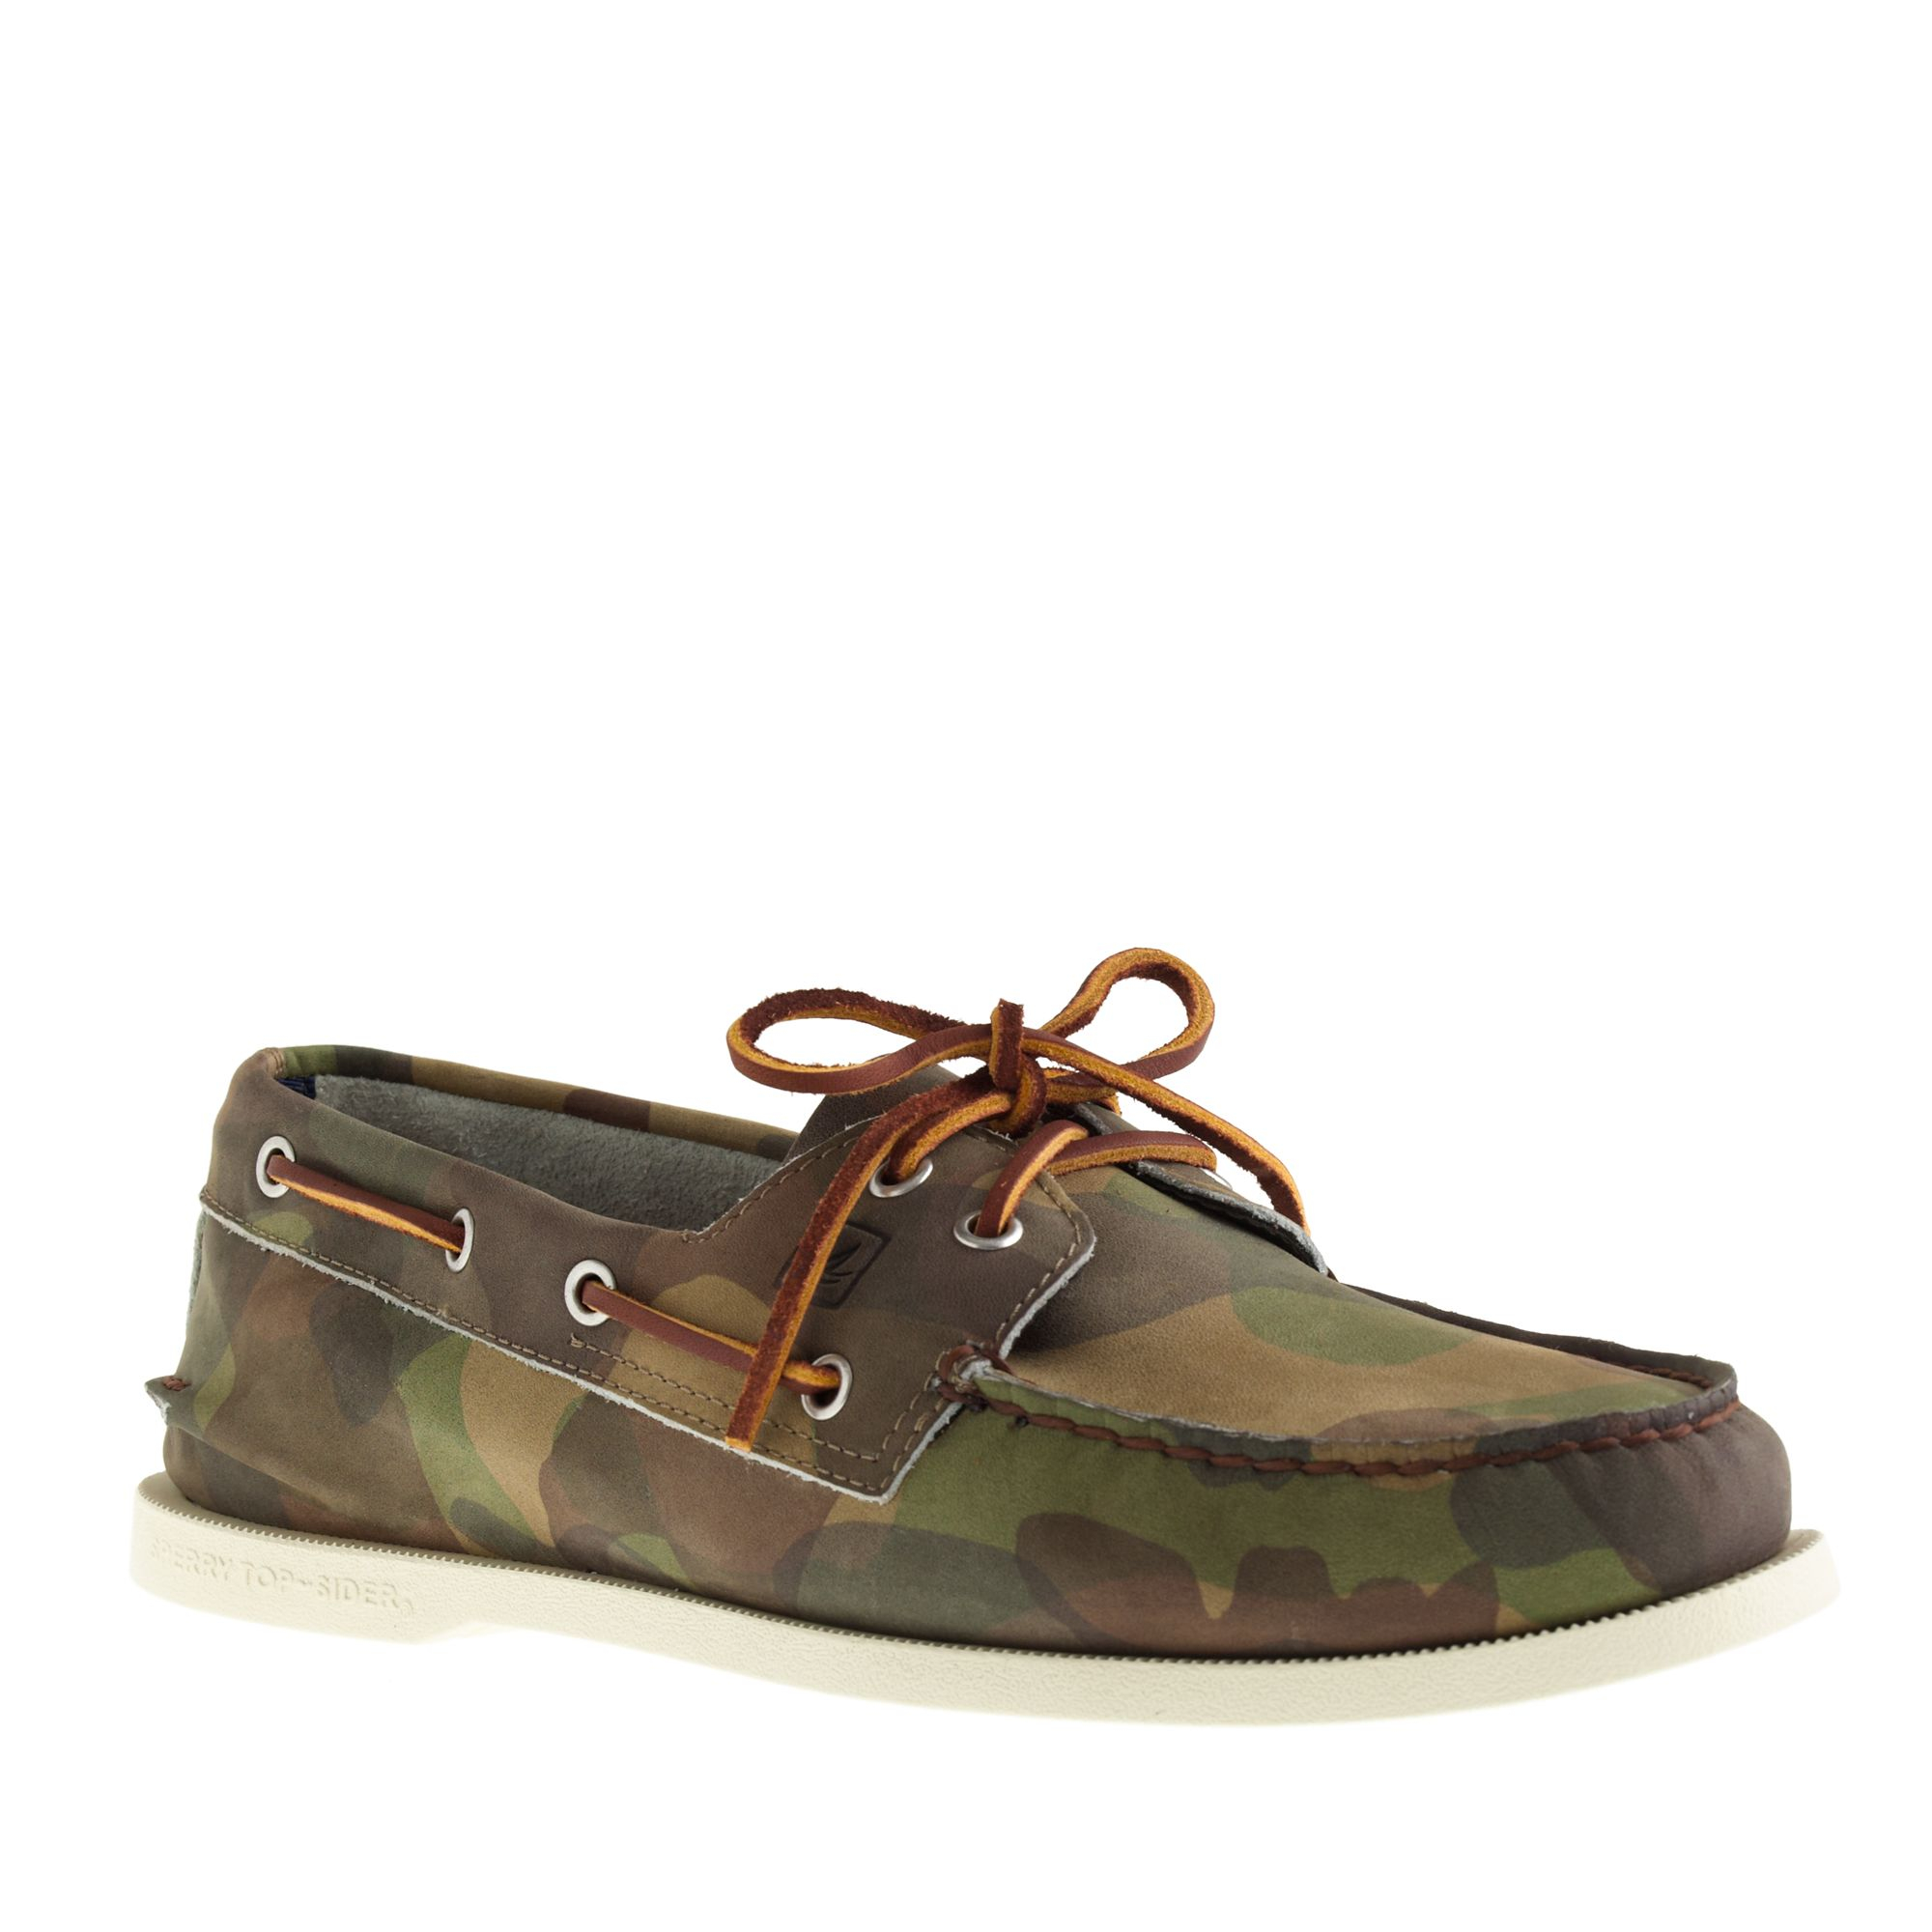 J.Crew Authentic Original 2eye Boat Shoes in Camo Leather